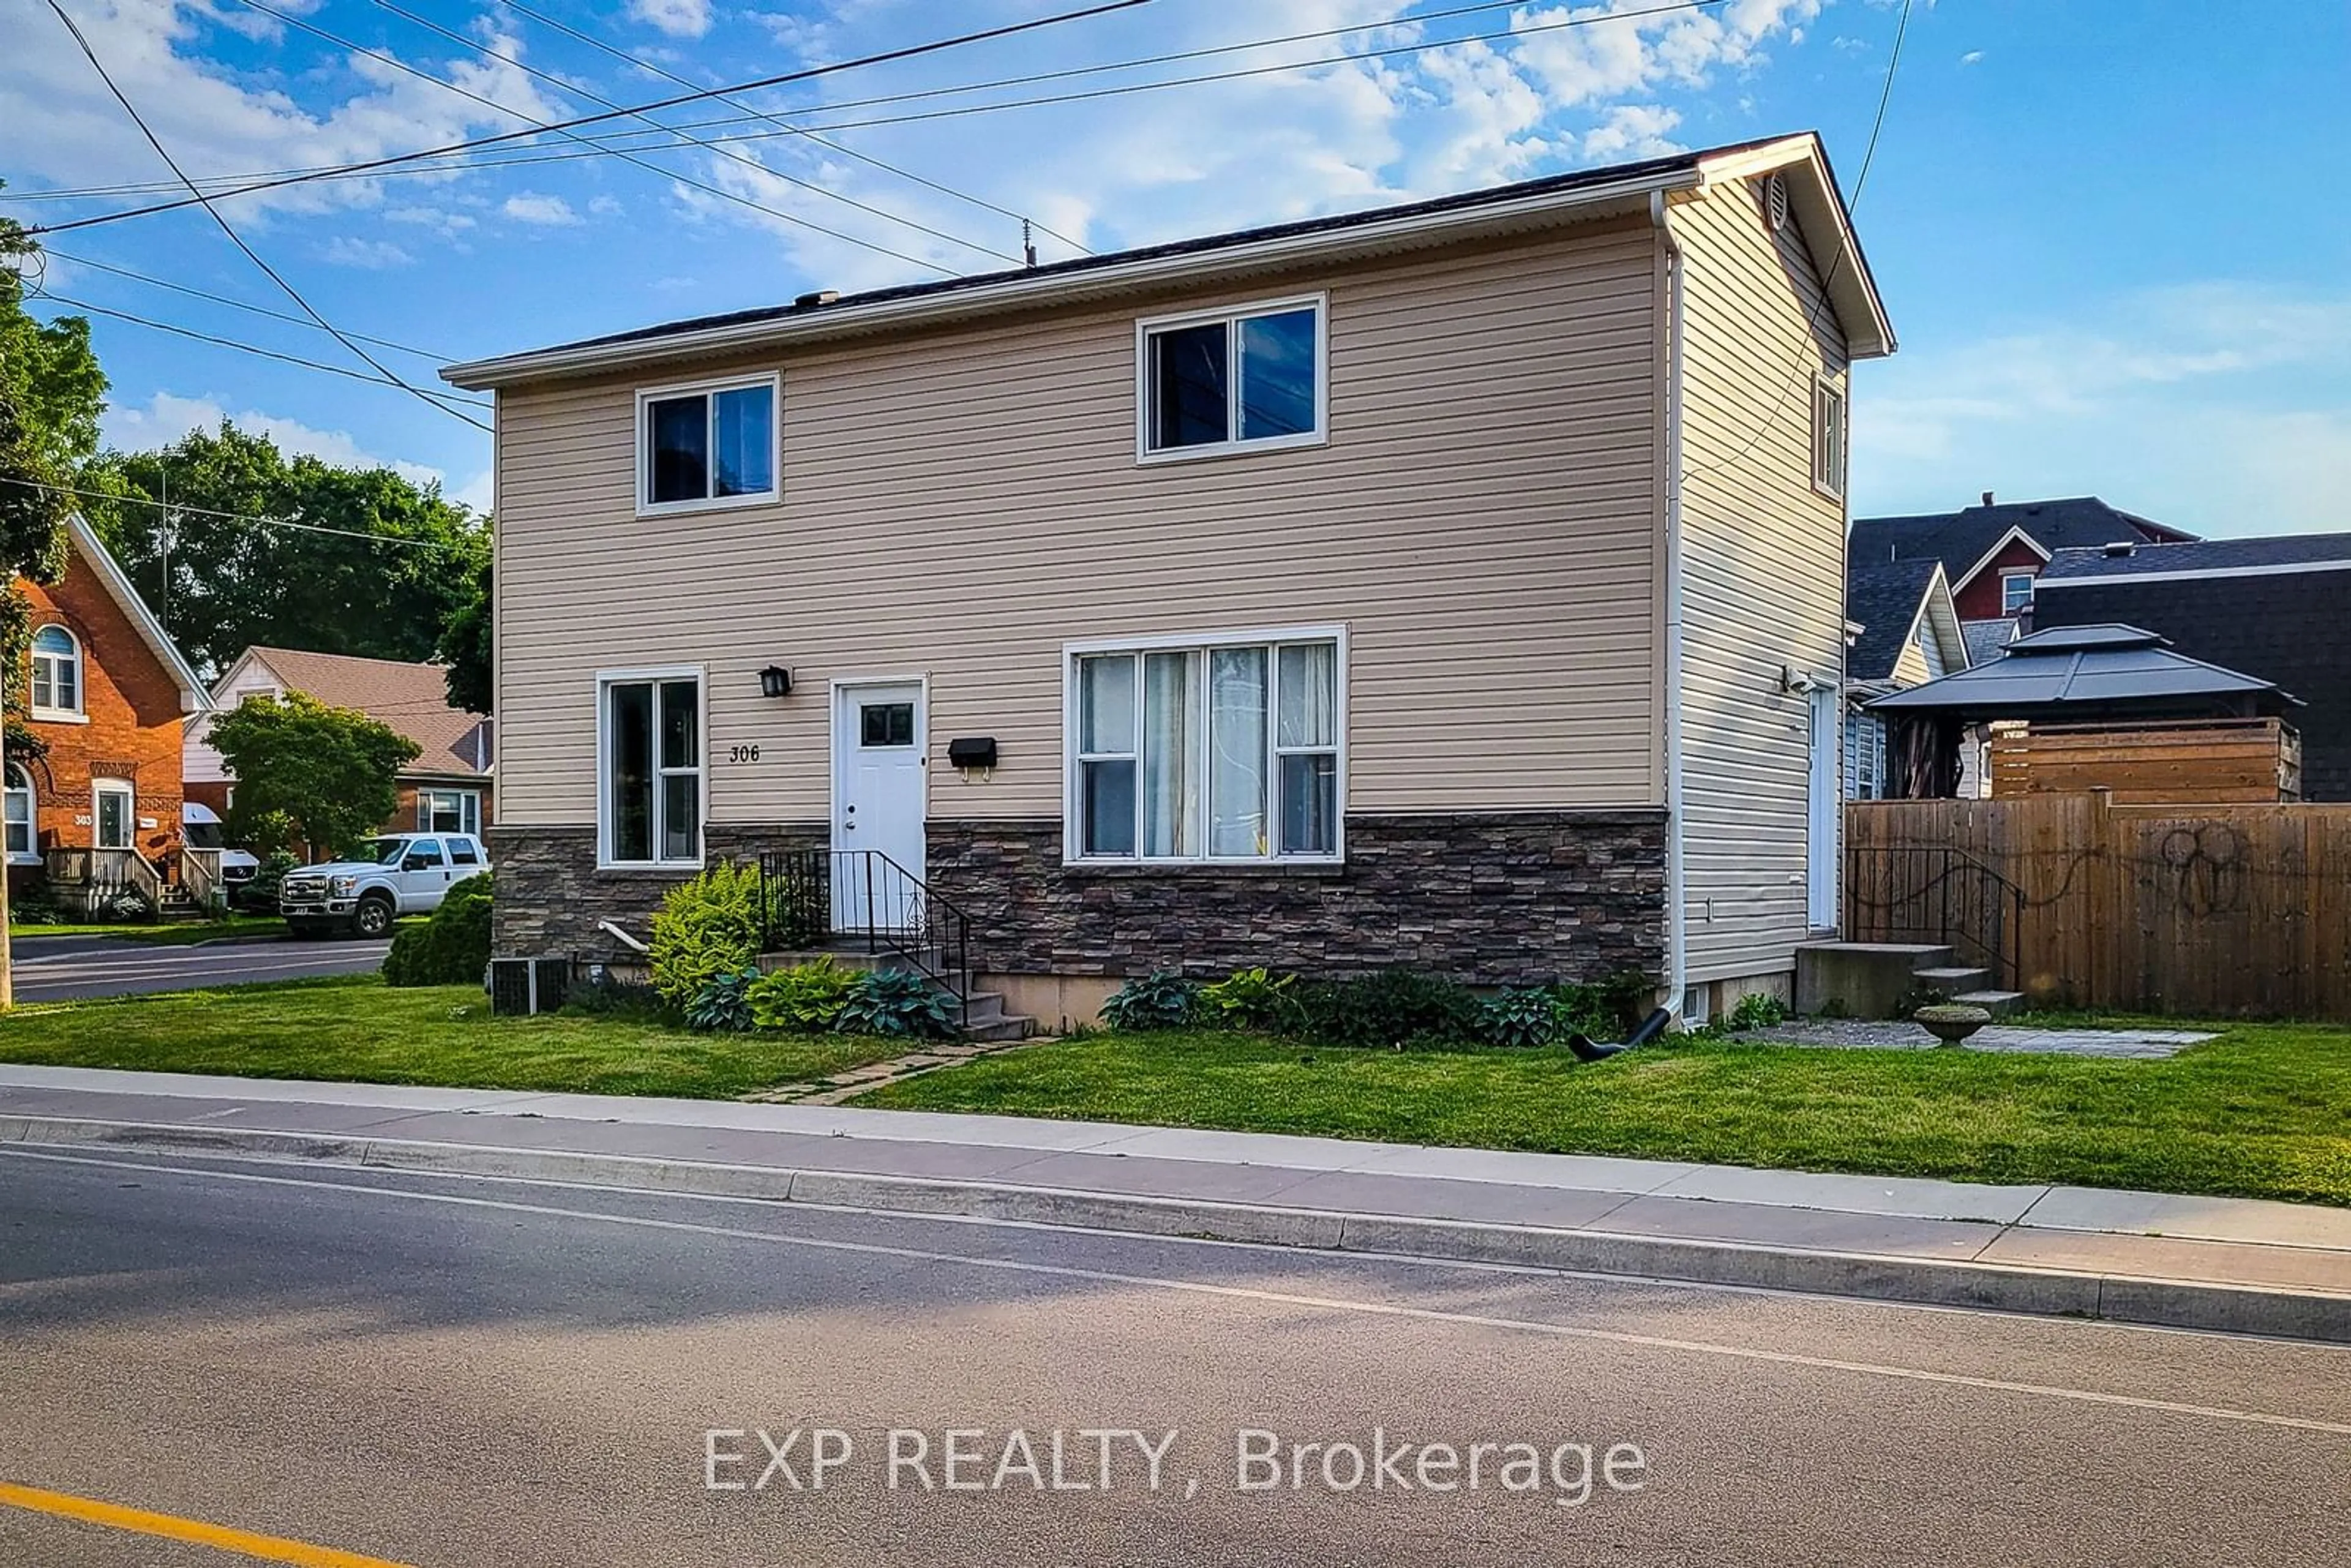 Frontside or backside of a home for 306 Darling St, Brantford Ontario N3S 3X8